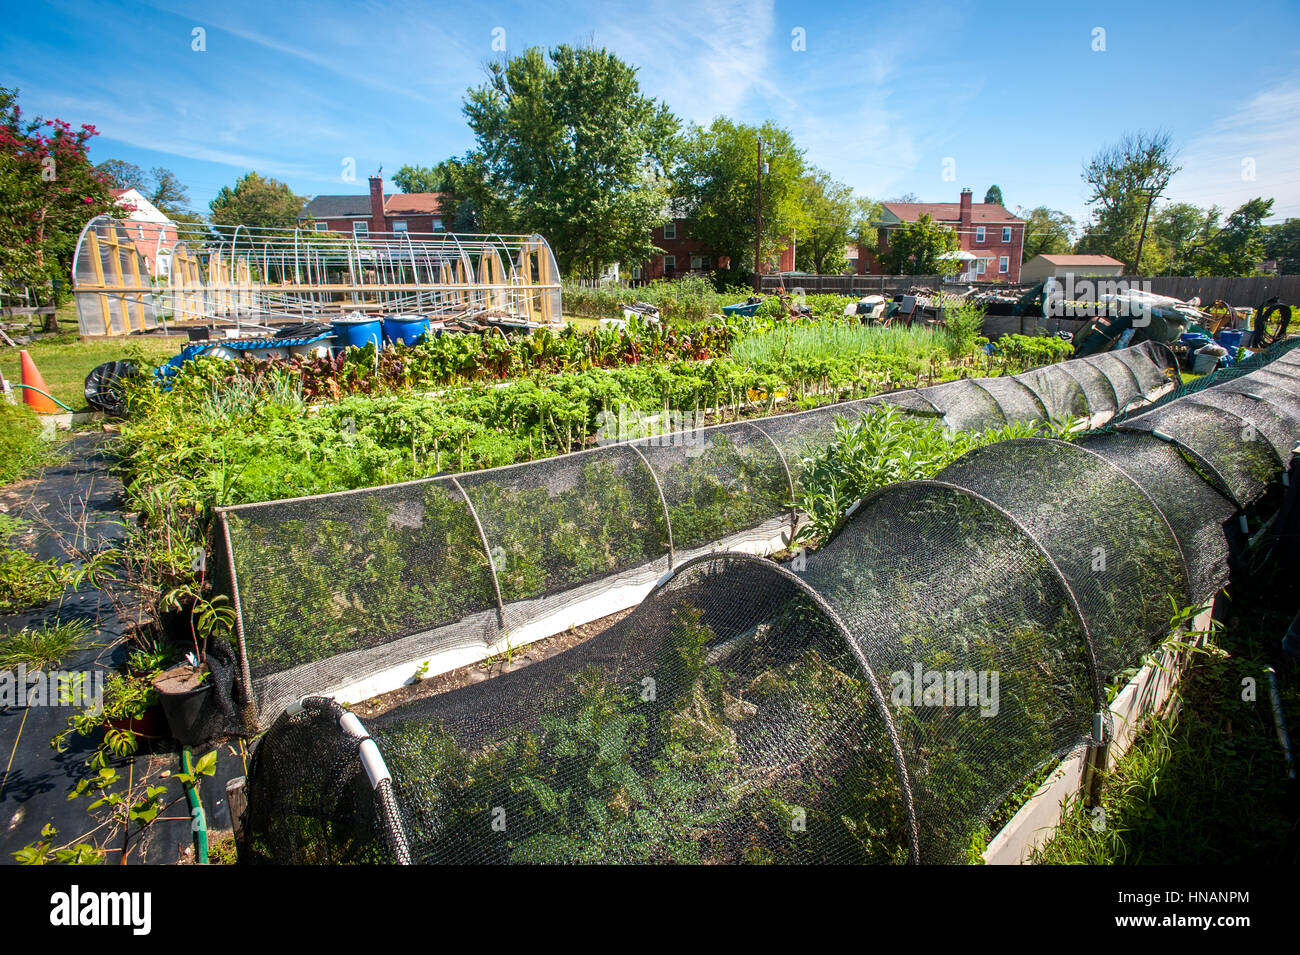 The Property Of A Thriving Urban Vegetable Garden Located In Stock